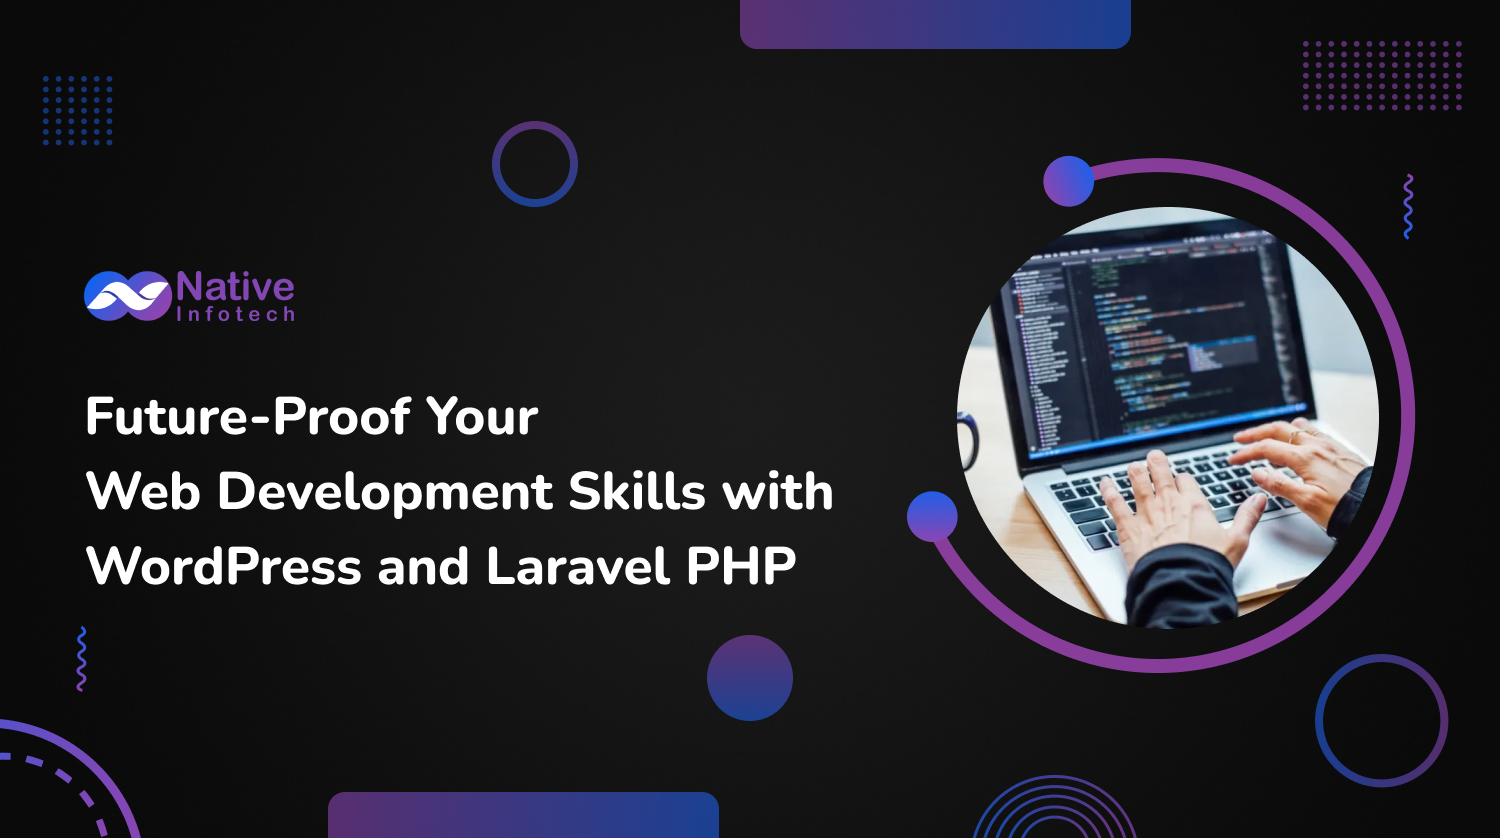 Future-Proof Your Web Development Skills with WordPress and Laravel PHP | Native Infotech